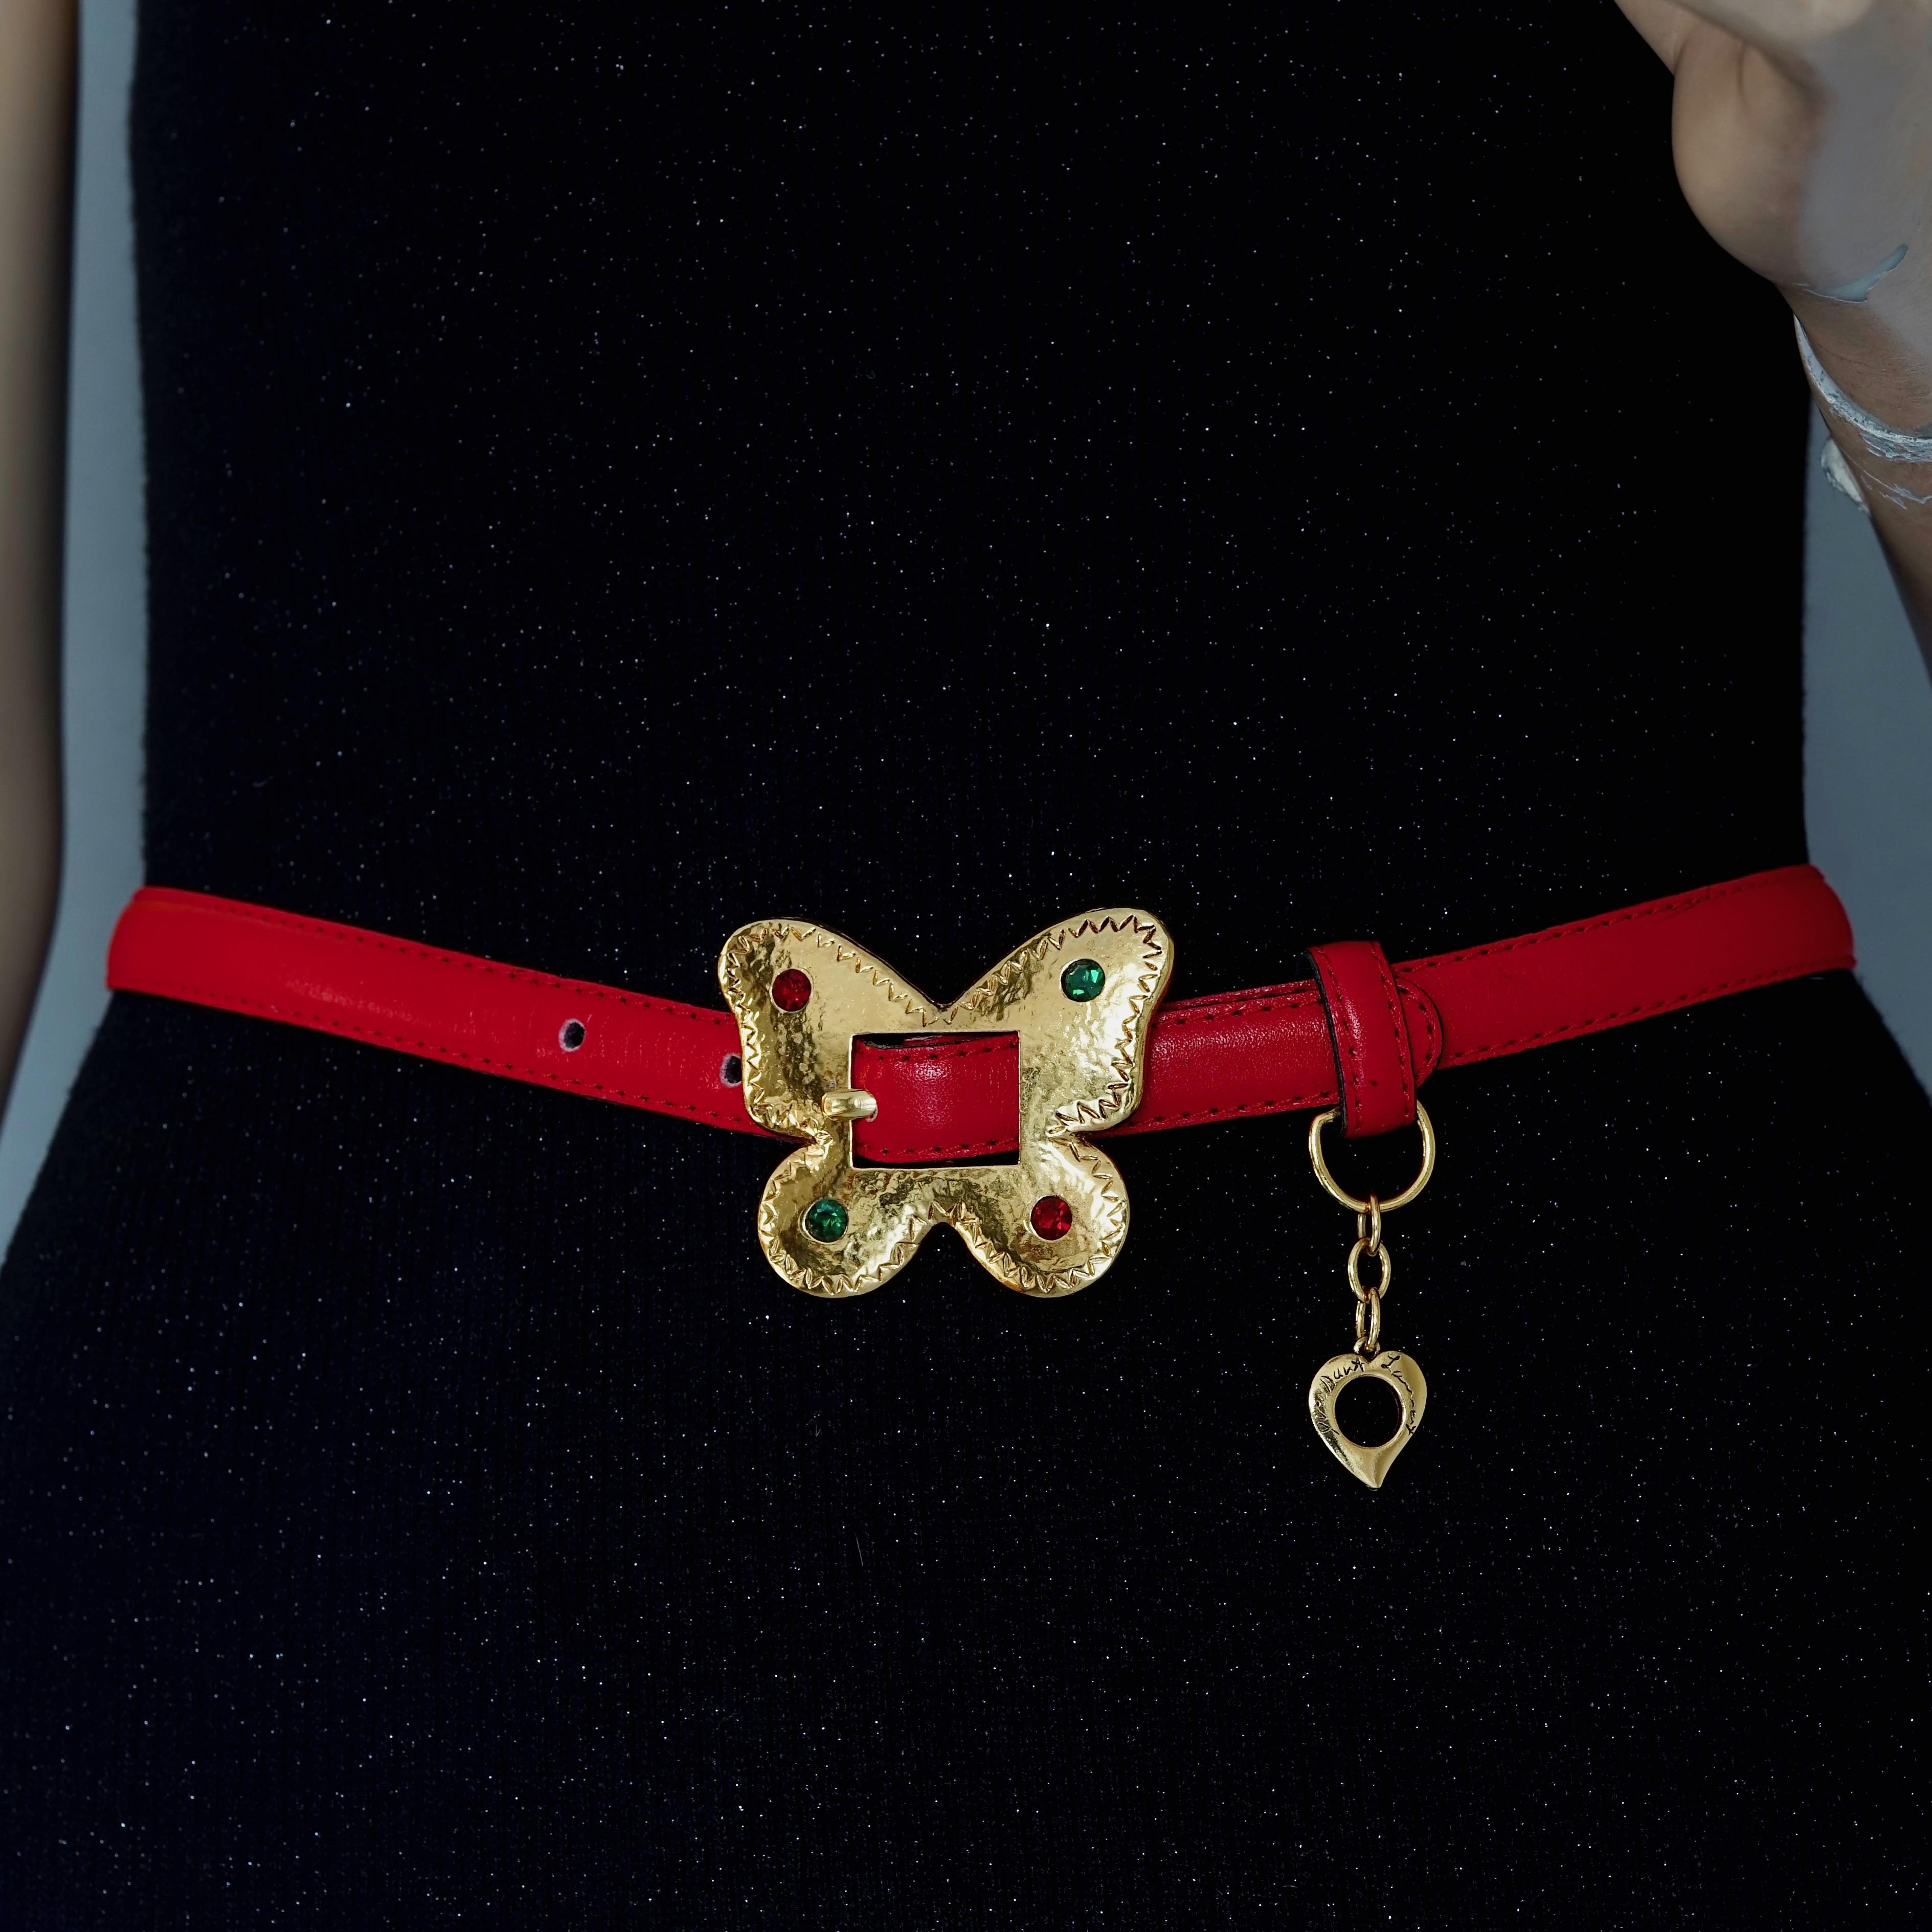 Vintage YVES SAINT LAURENT Ysl Jewelled Butterfly Red Leather Belt

Measurements:
Buckle Height: 1.96 inches (5 cm)
Buckle Width: 2.44 inches (6.2 cm)
Strap Height: 0.59 inch (1.5 cm)
Wearable Length: 28.34 inches to 29.92 inches (72 cm to 76